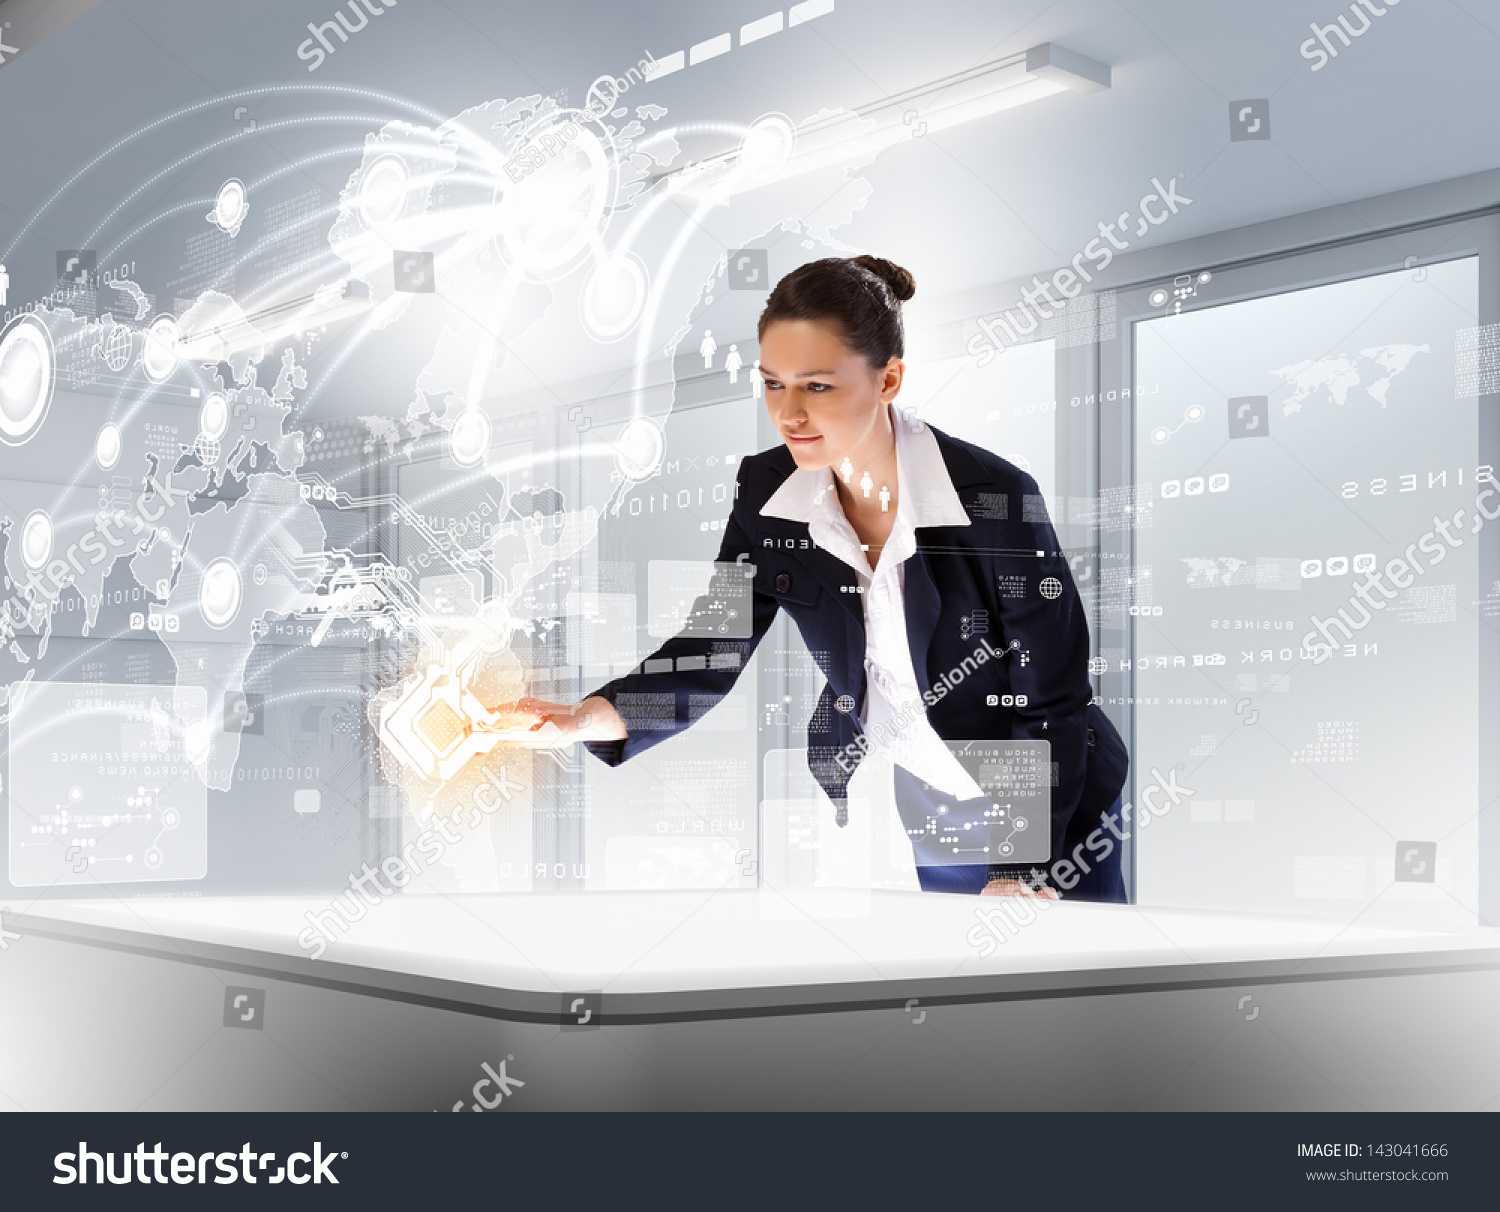 stock-photo-image-of-young-businesswoman-clicking-icon-on-high-tech-picture-143041666